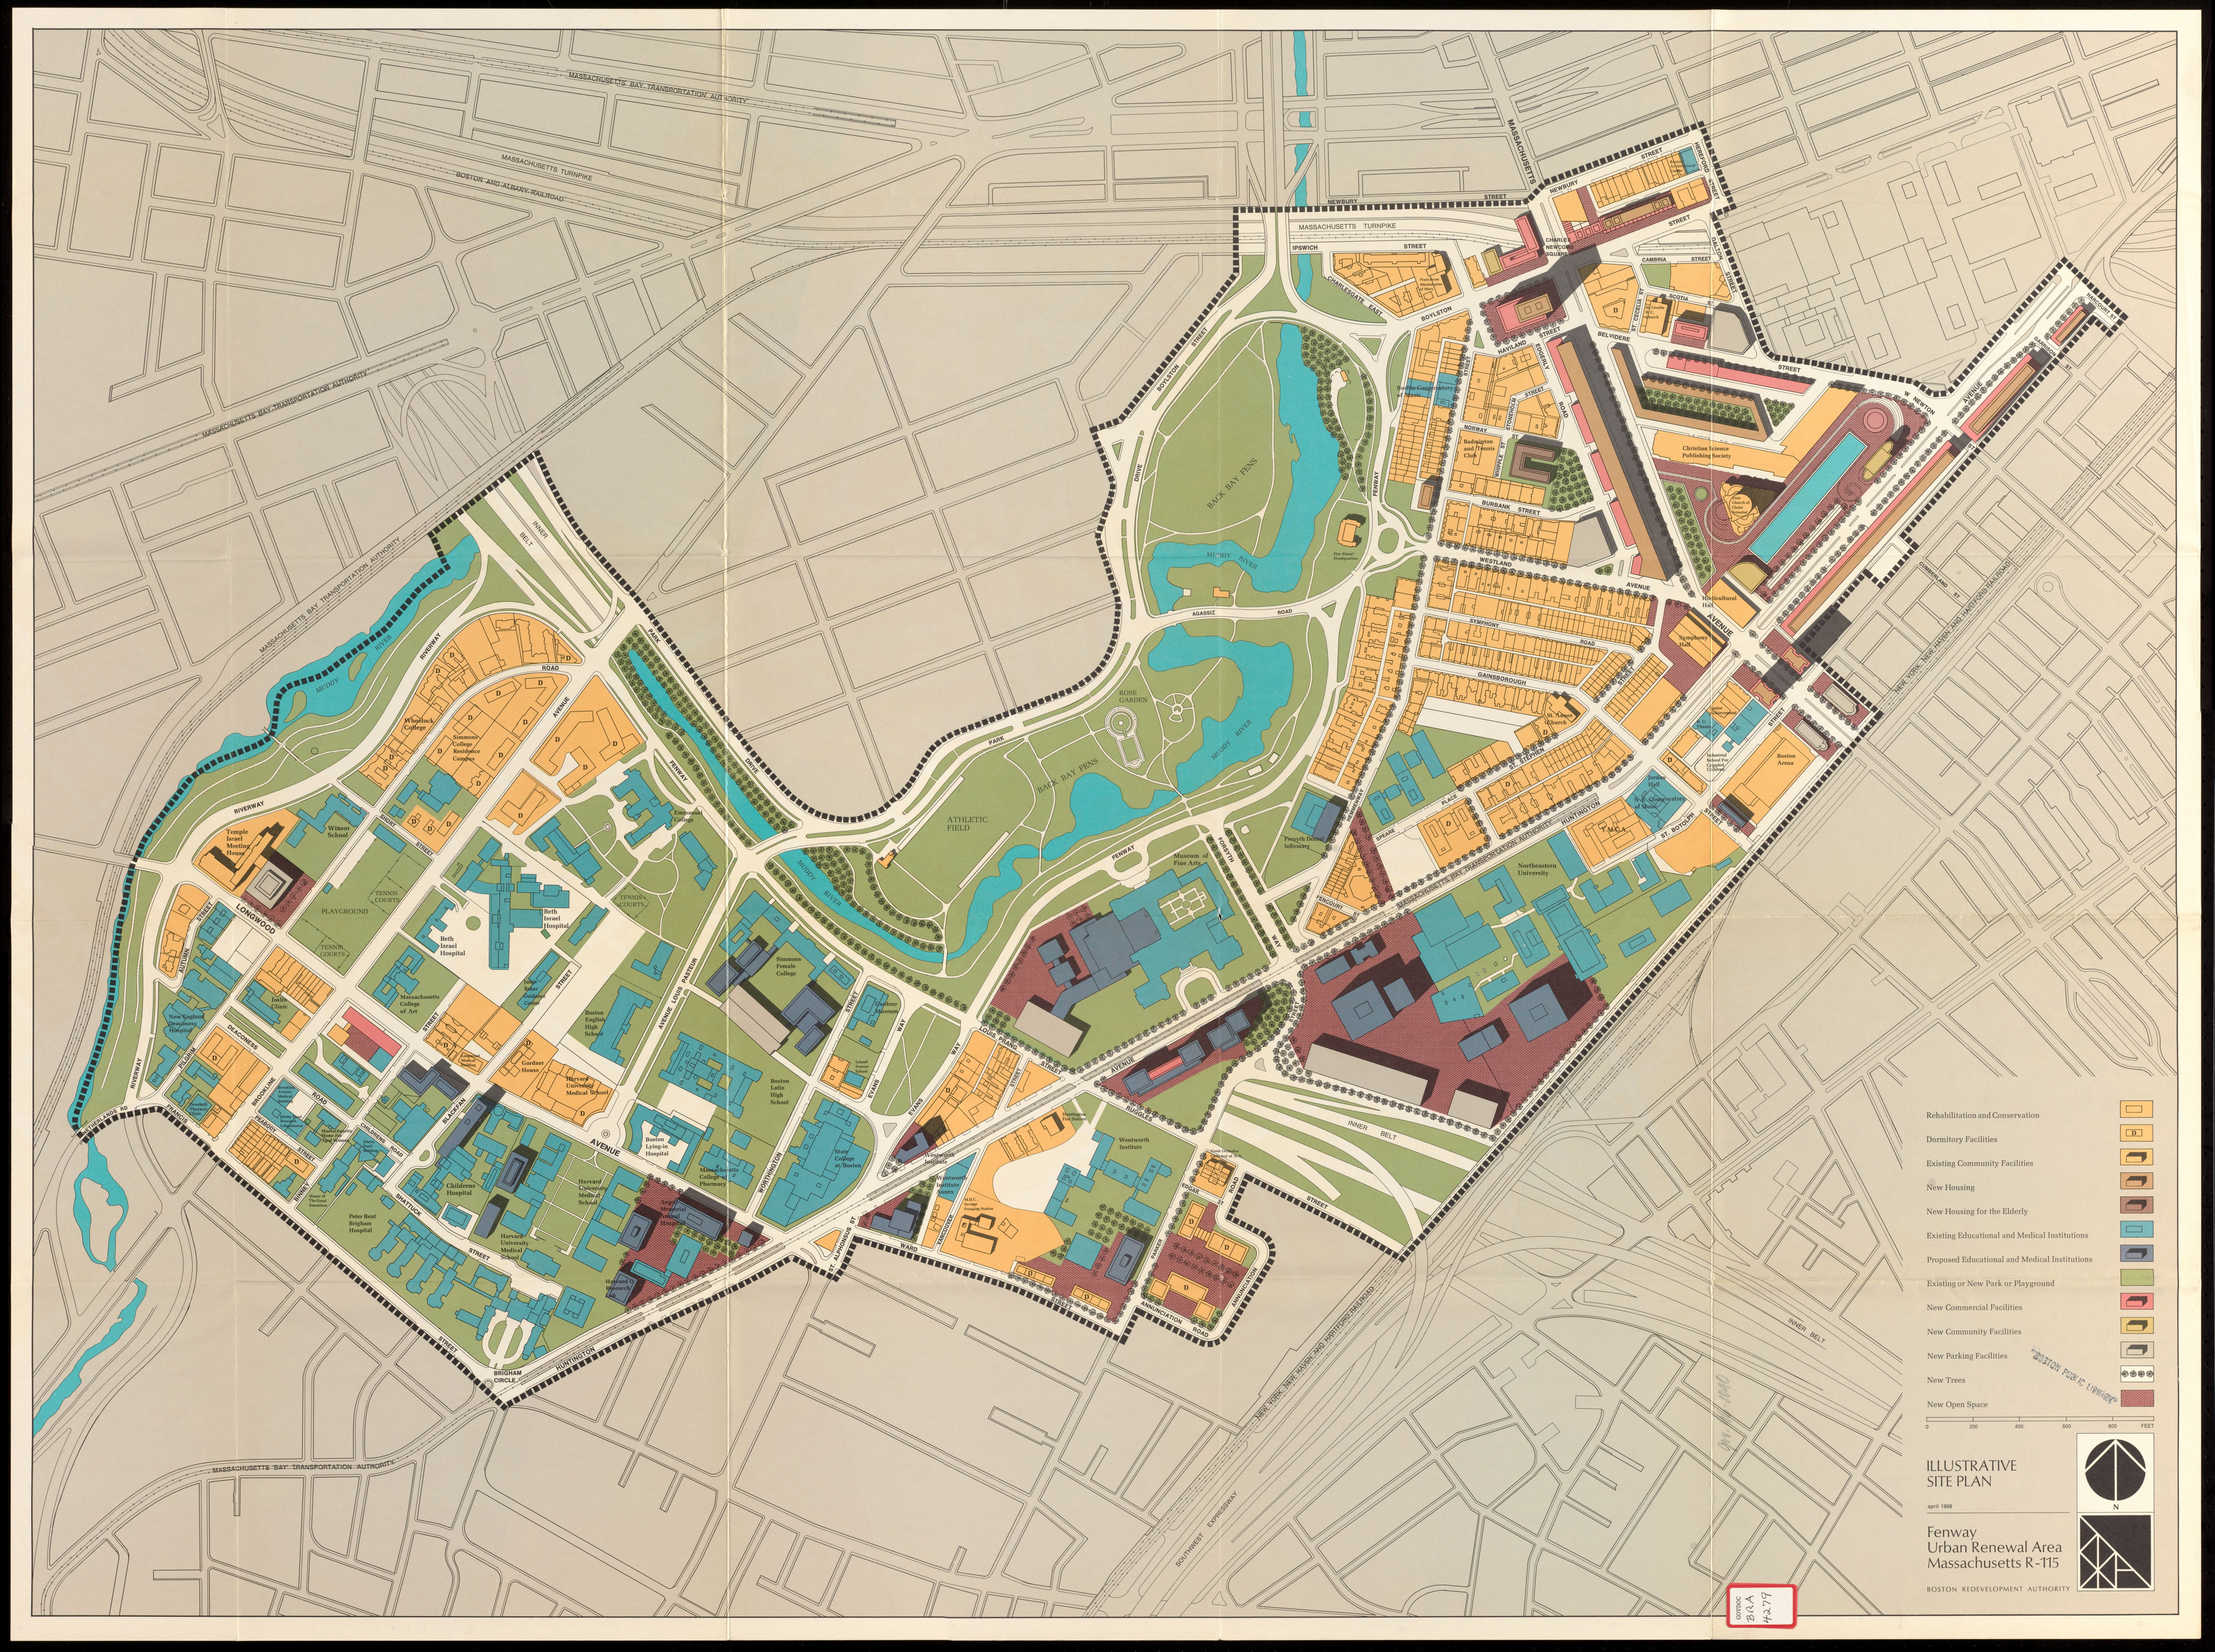 Illustrative site plan for the Fenway urban renewal area, from LMEC collections.